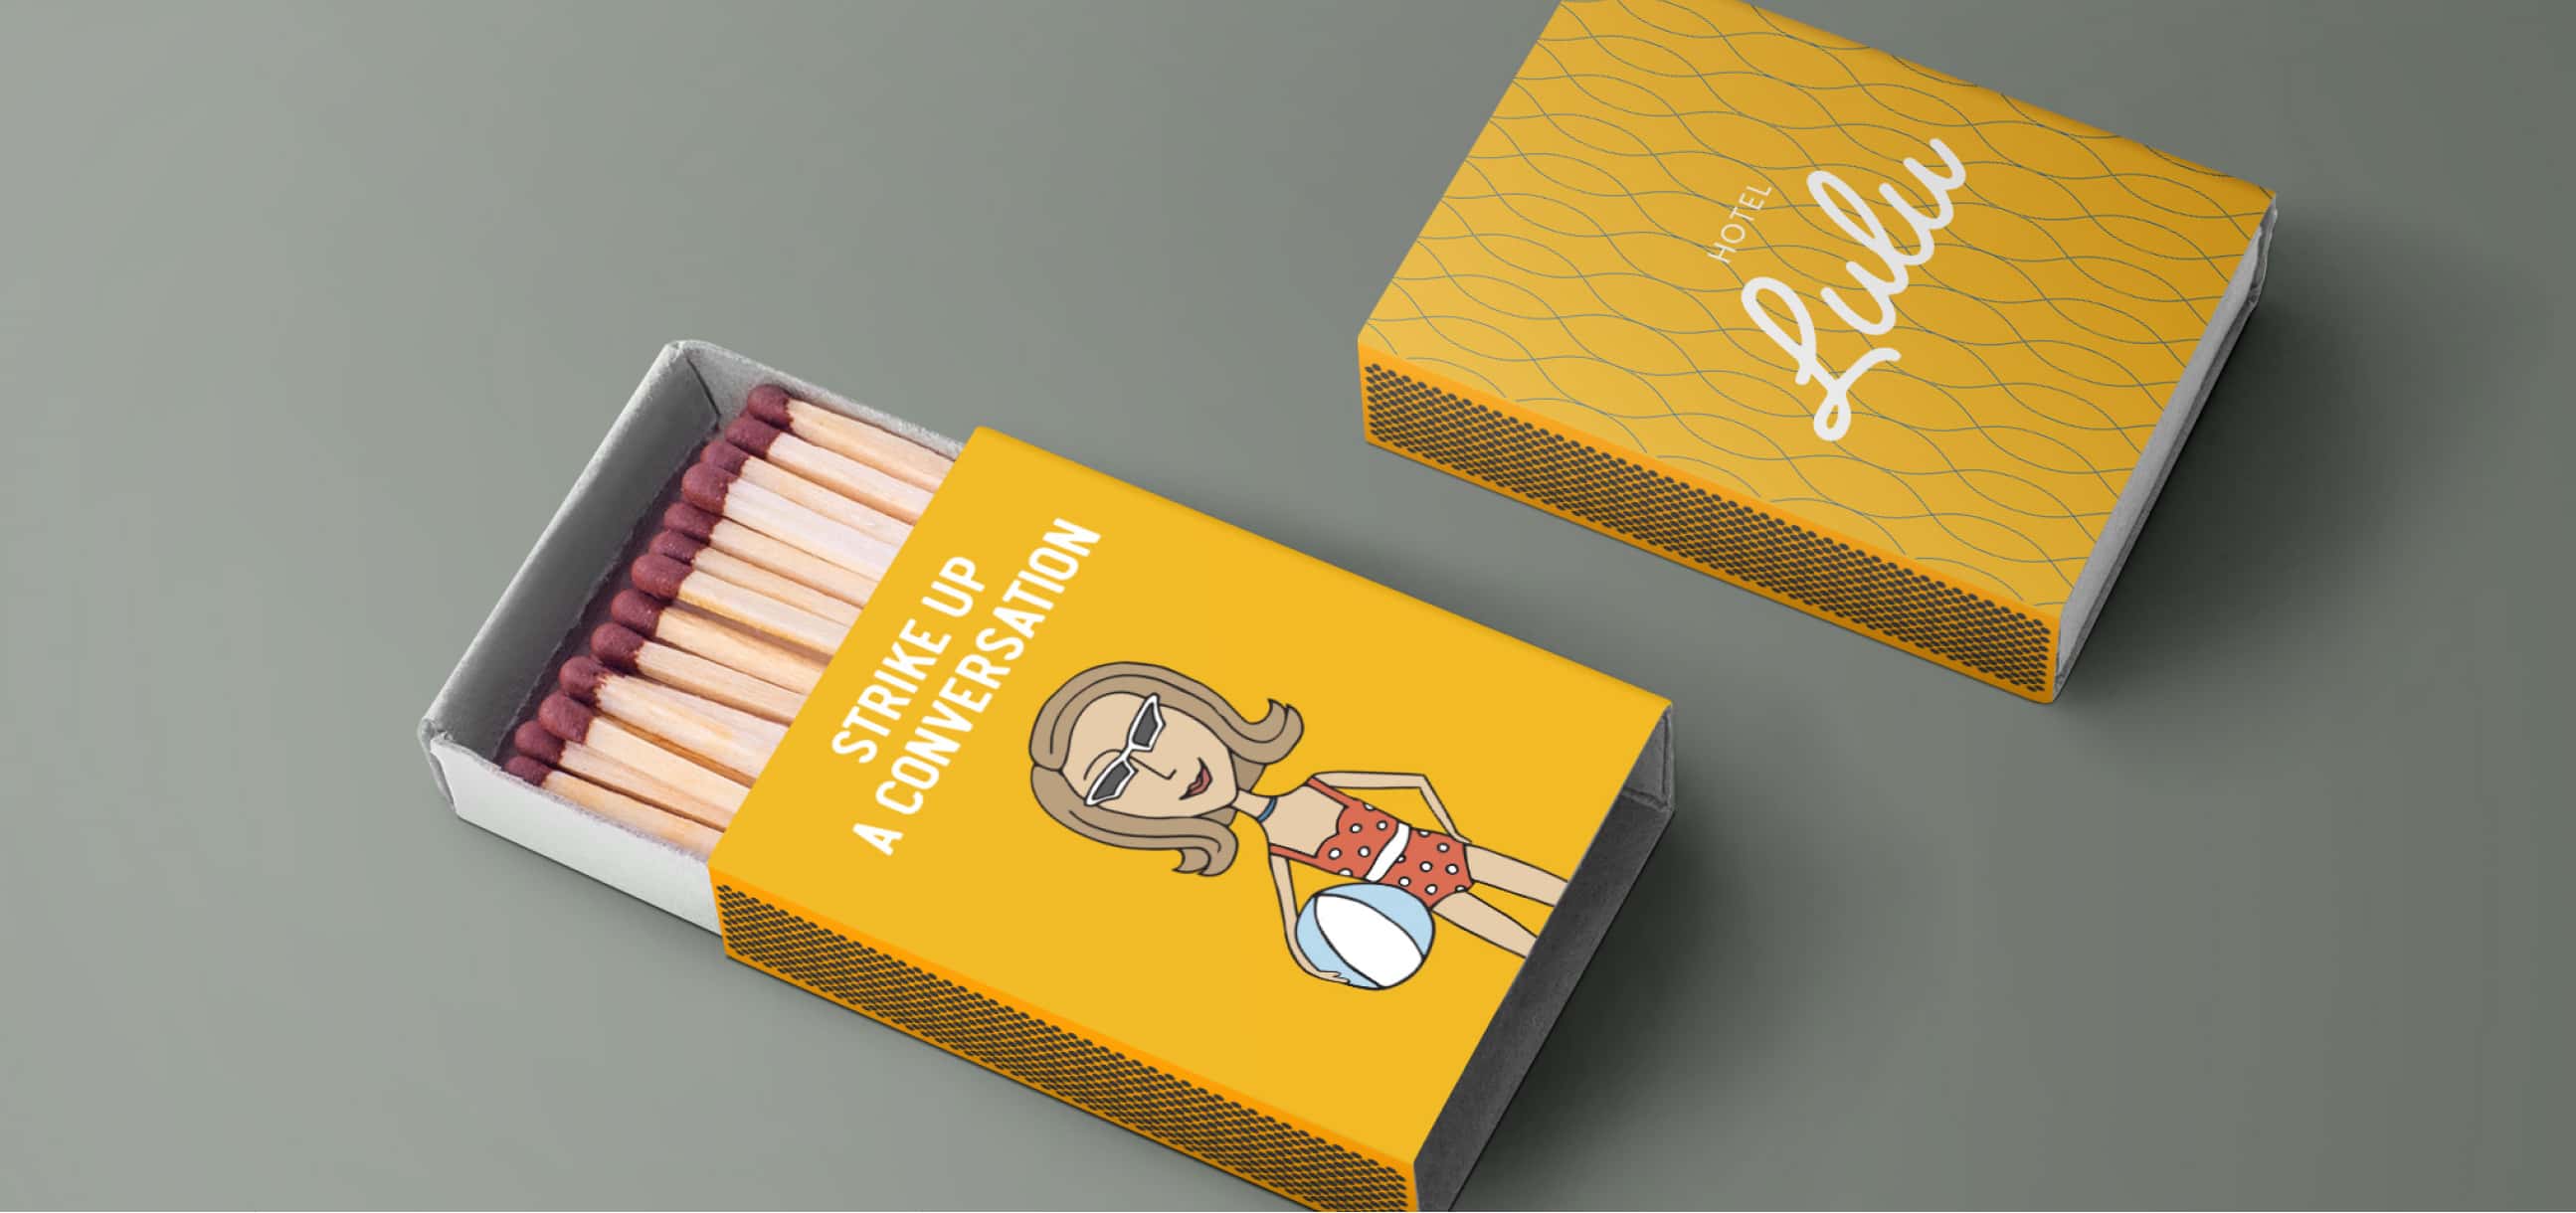 An open matchbox with a design from Hotel Lulu, featuring the text 'STRIKE UP A CONVERSATION' and an illustration of a woman with a cocktail, against a yellow and diamond-patterned background.